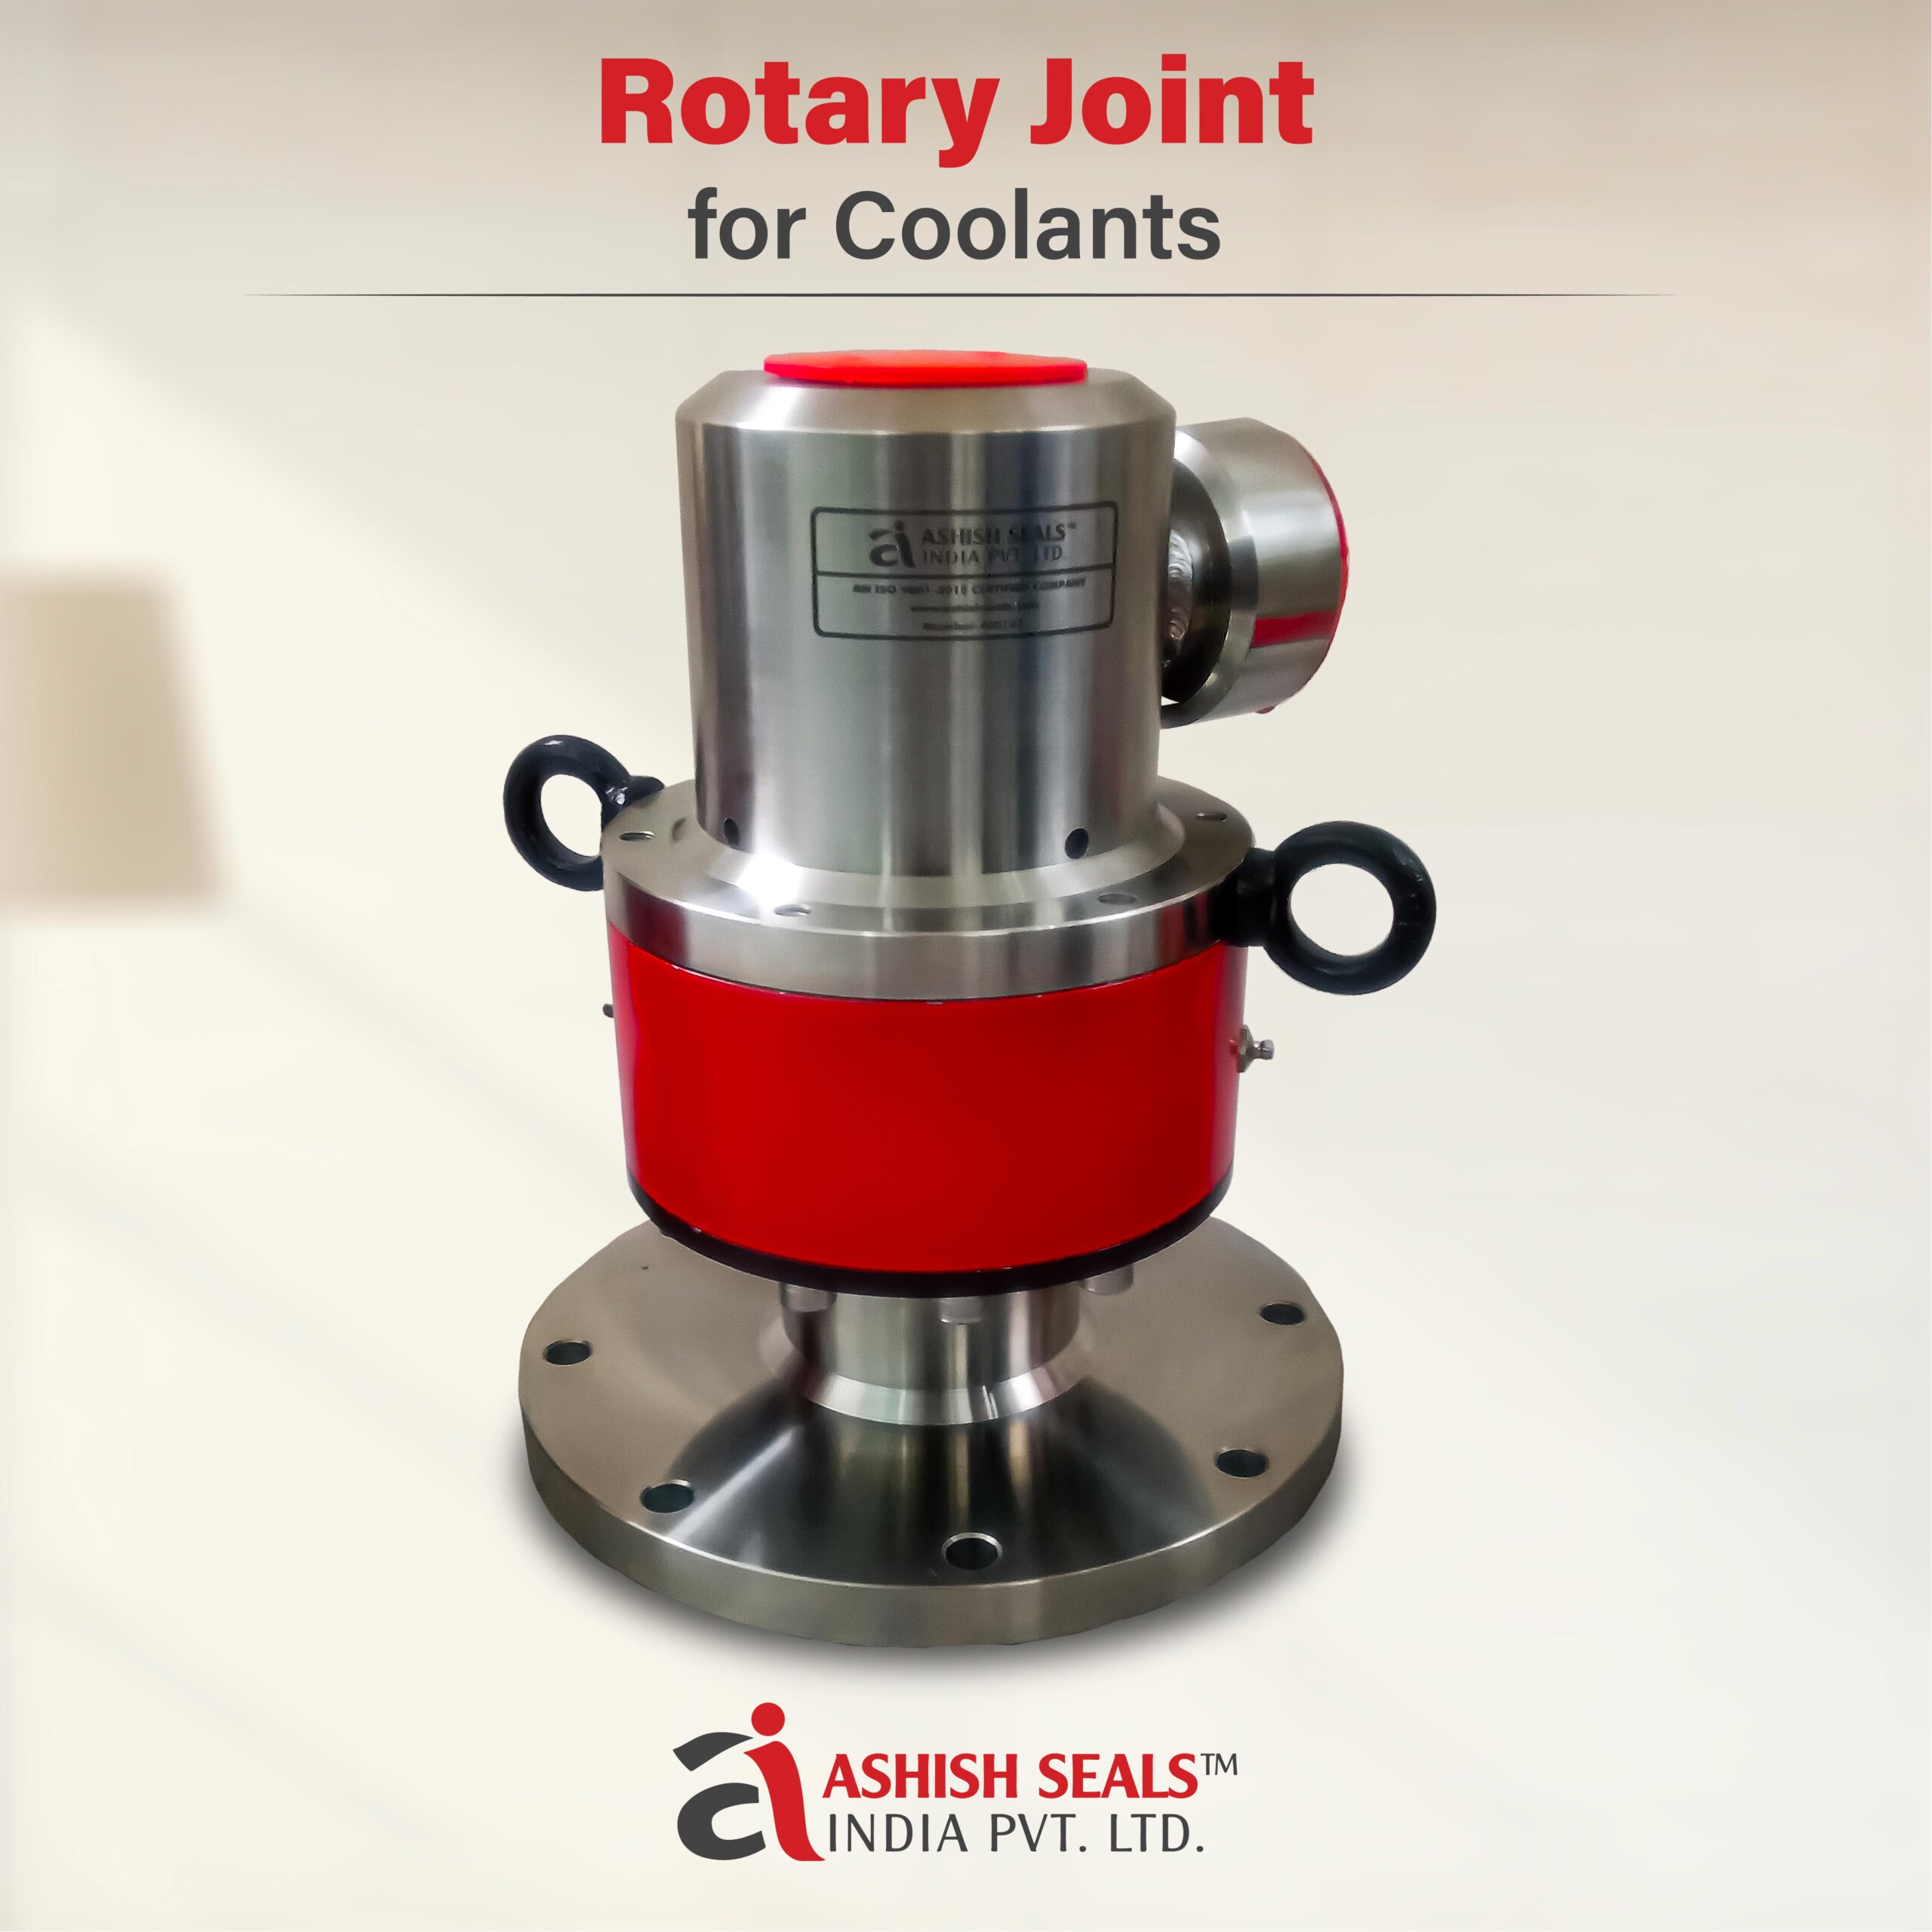 Rotary Joints for Coolants